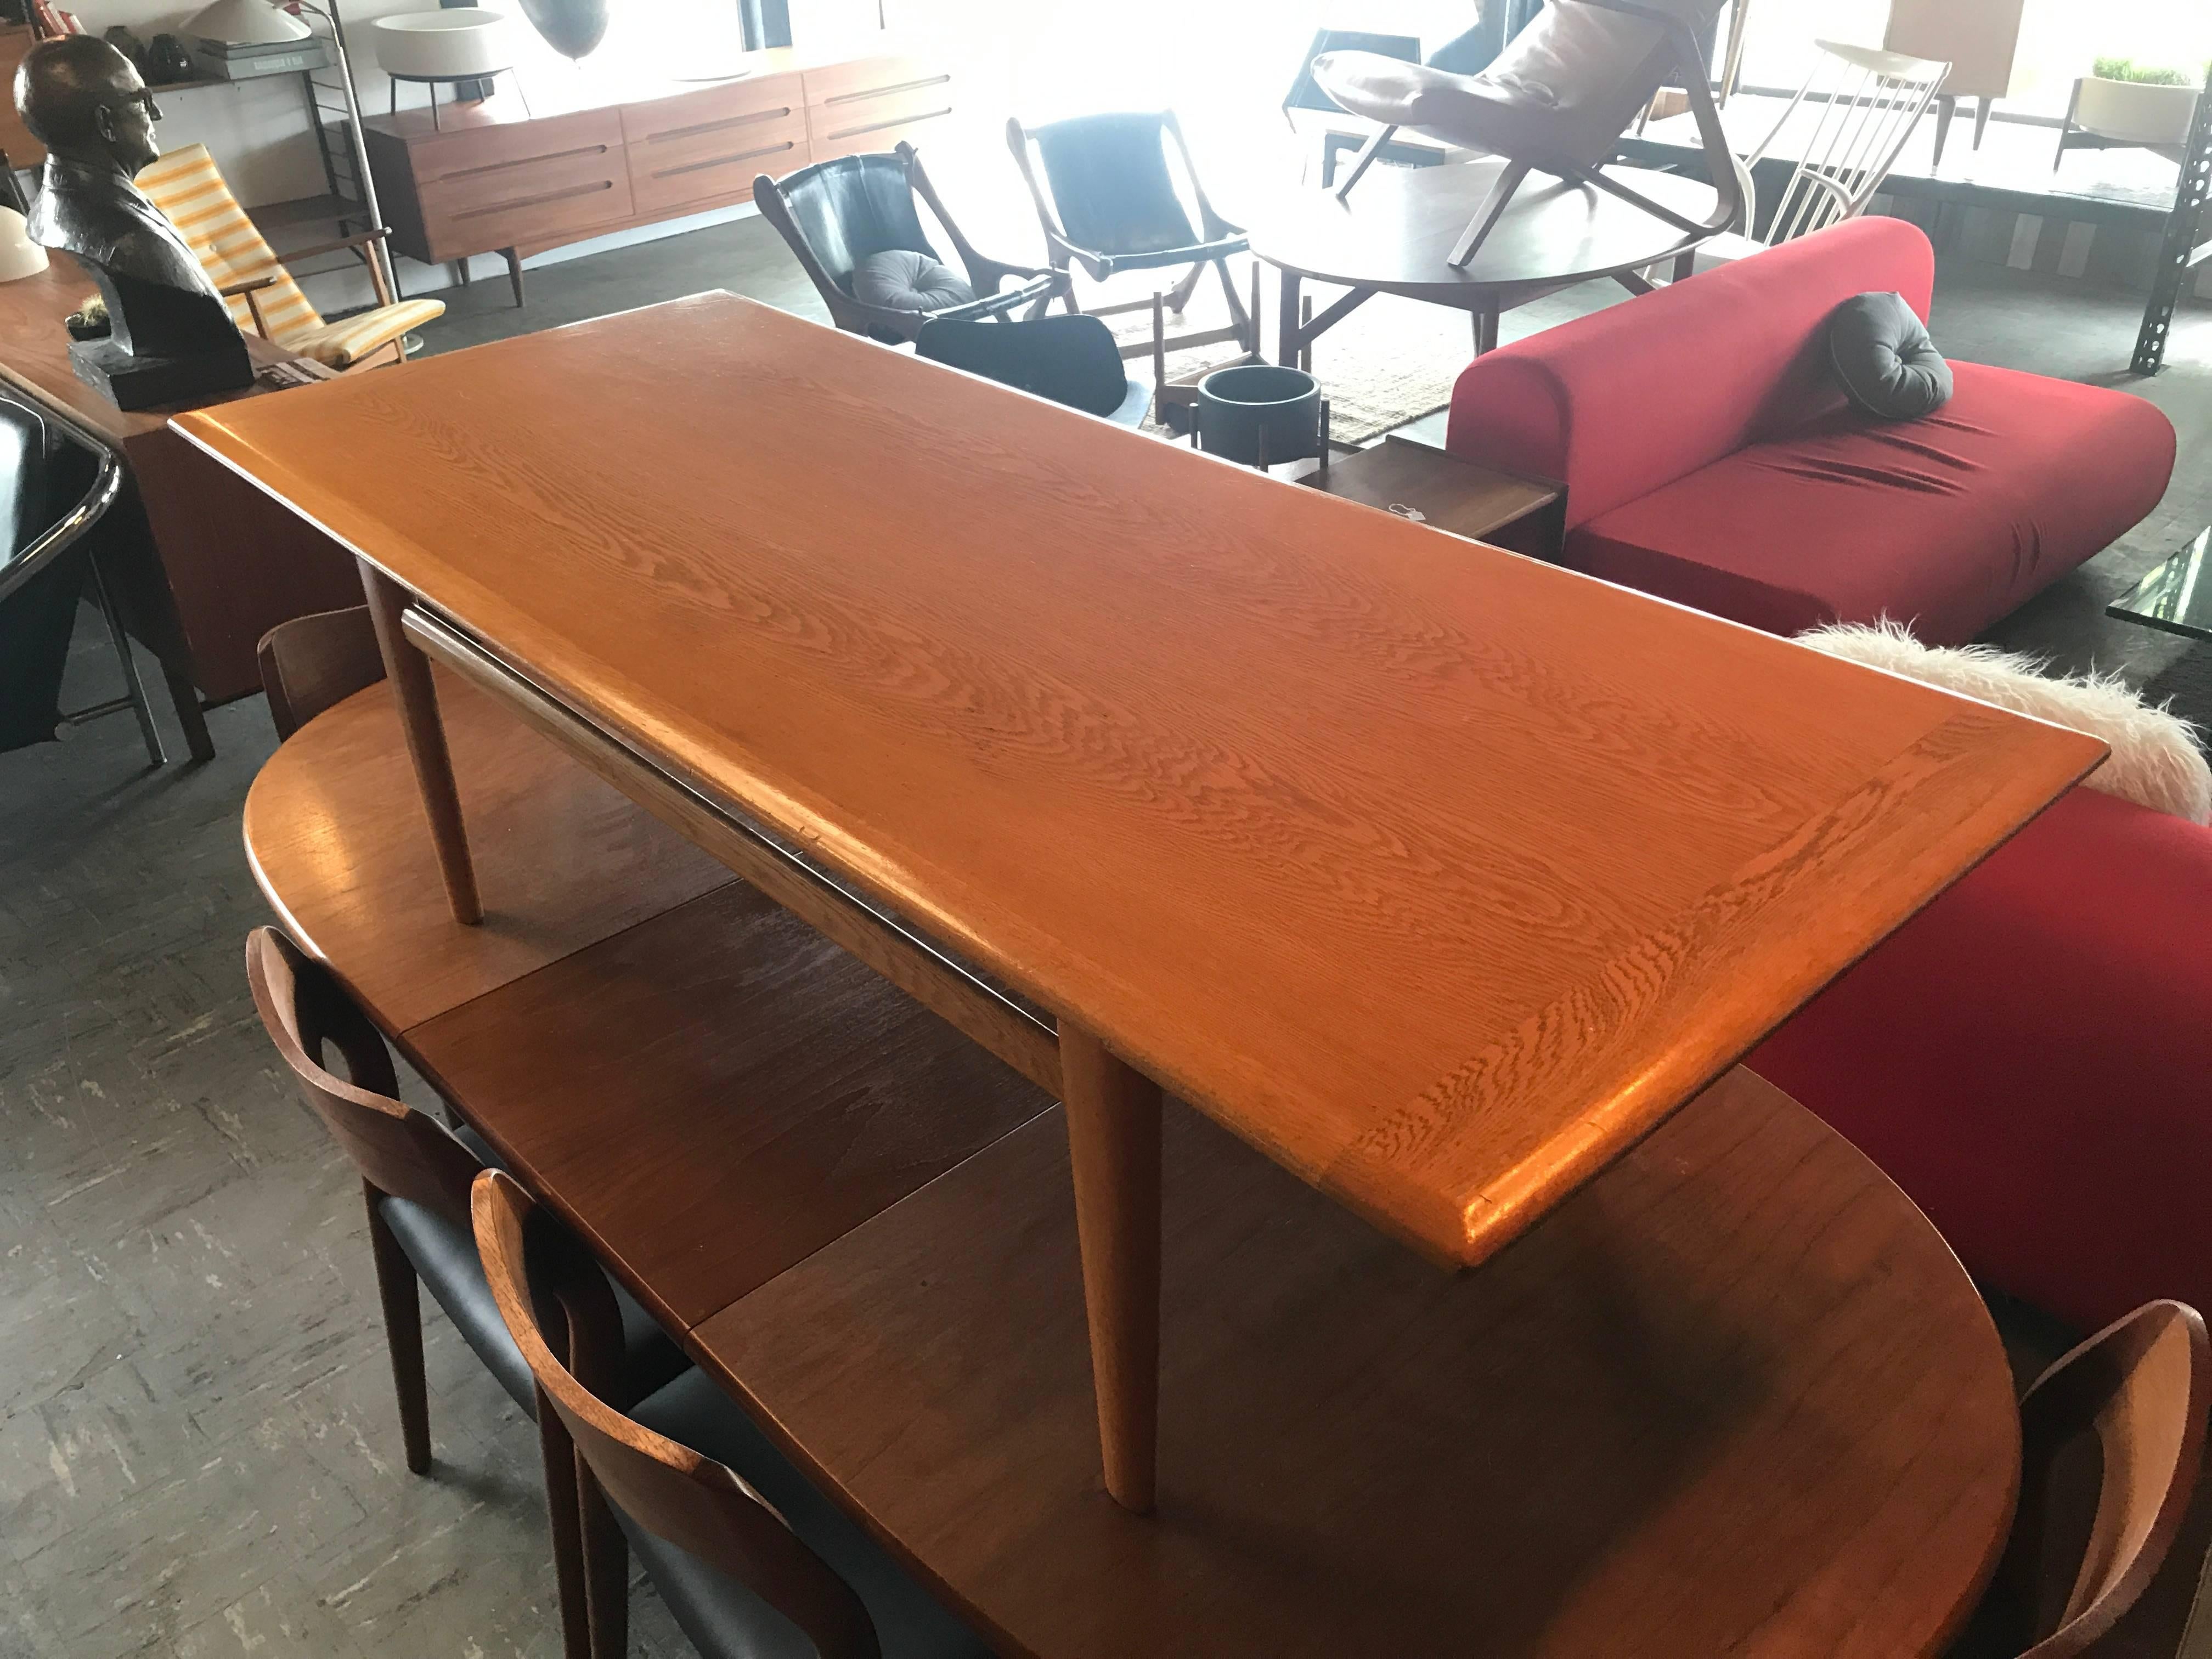 Danish Mid-Century Modern oak coffee table in great vintage condition.